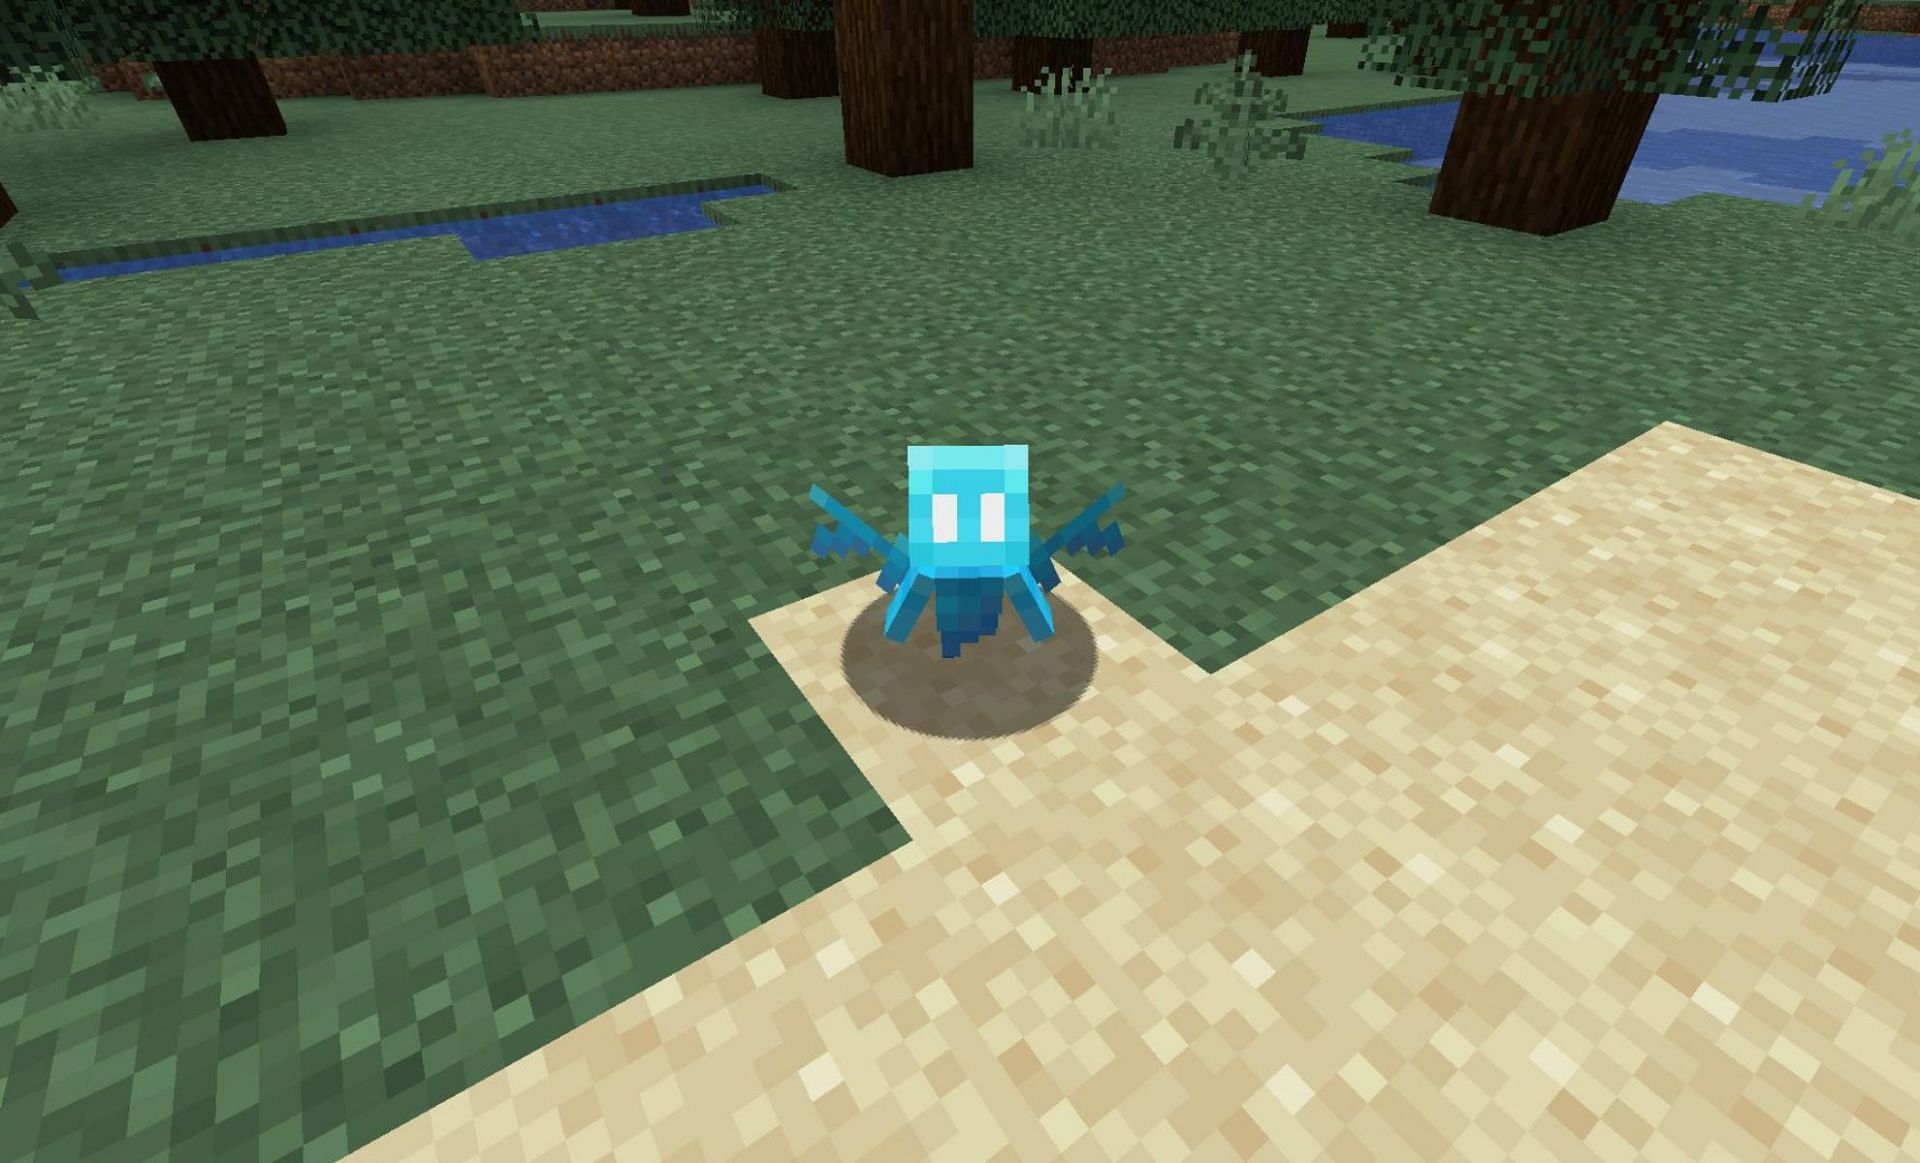 Allay received some new features (Image via Mojang)